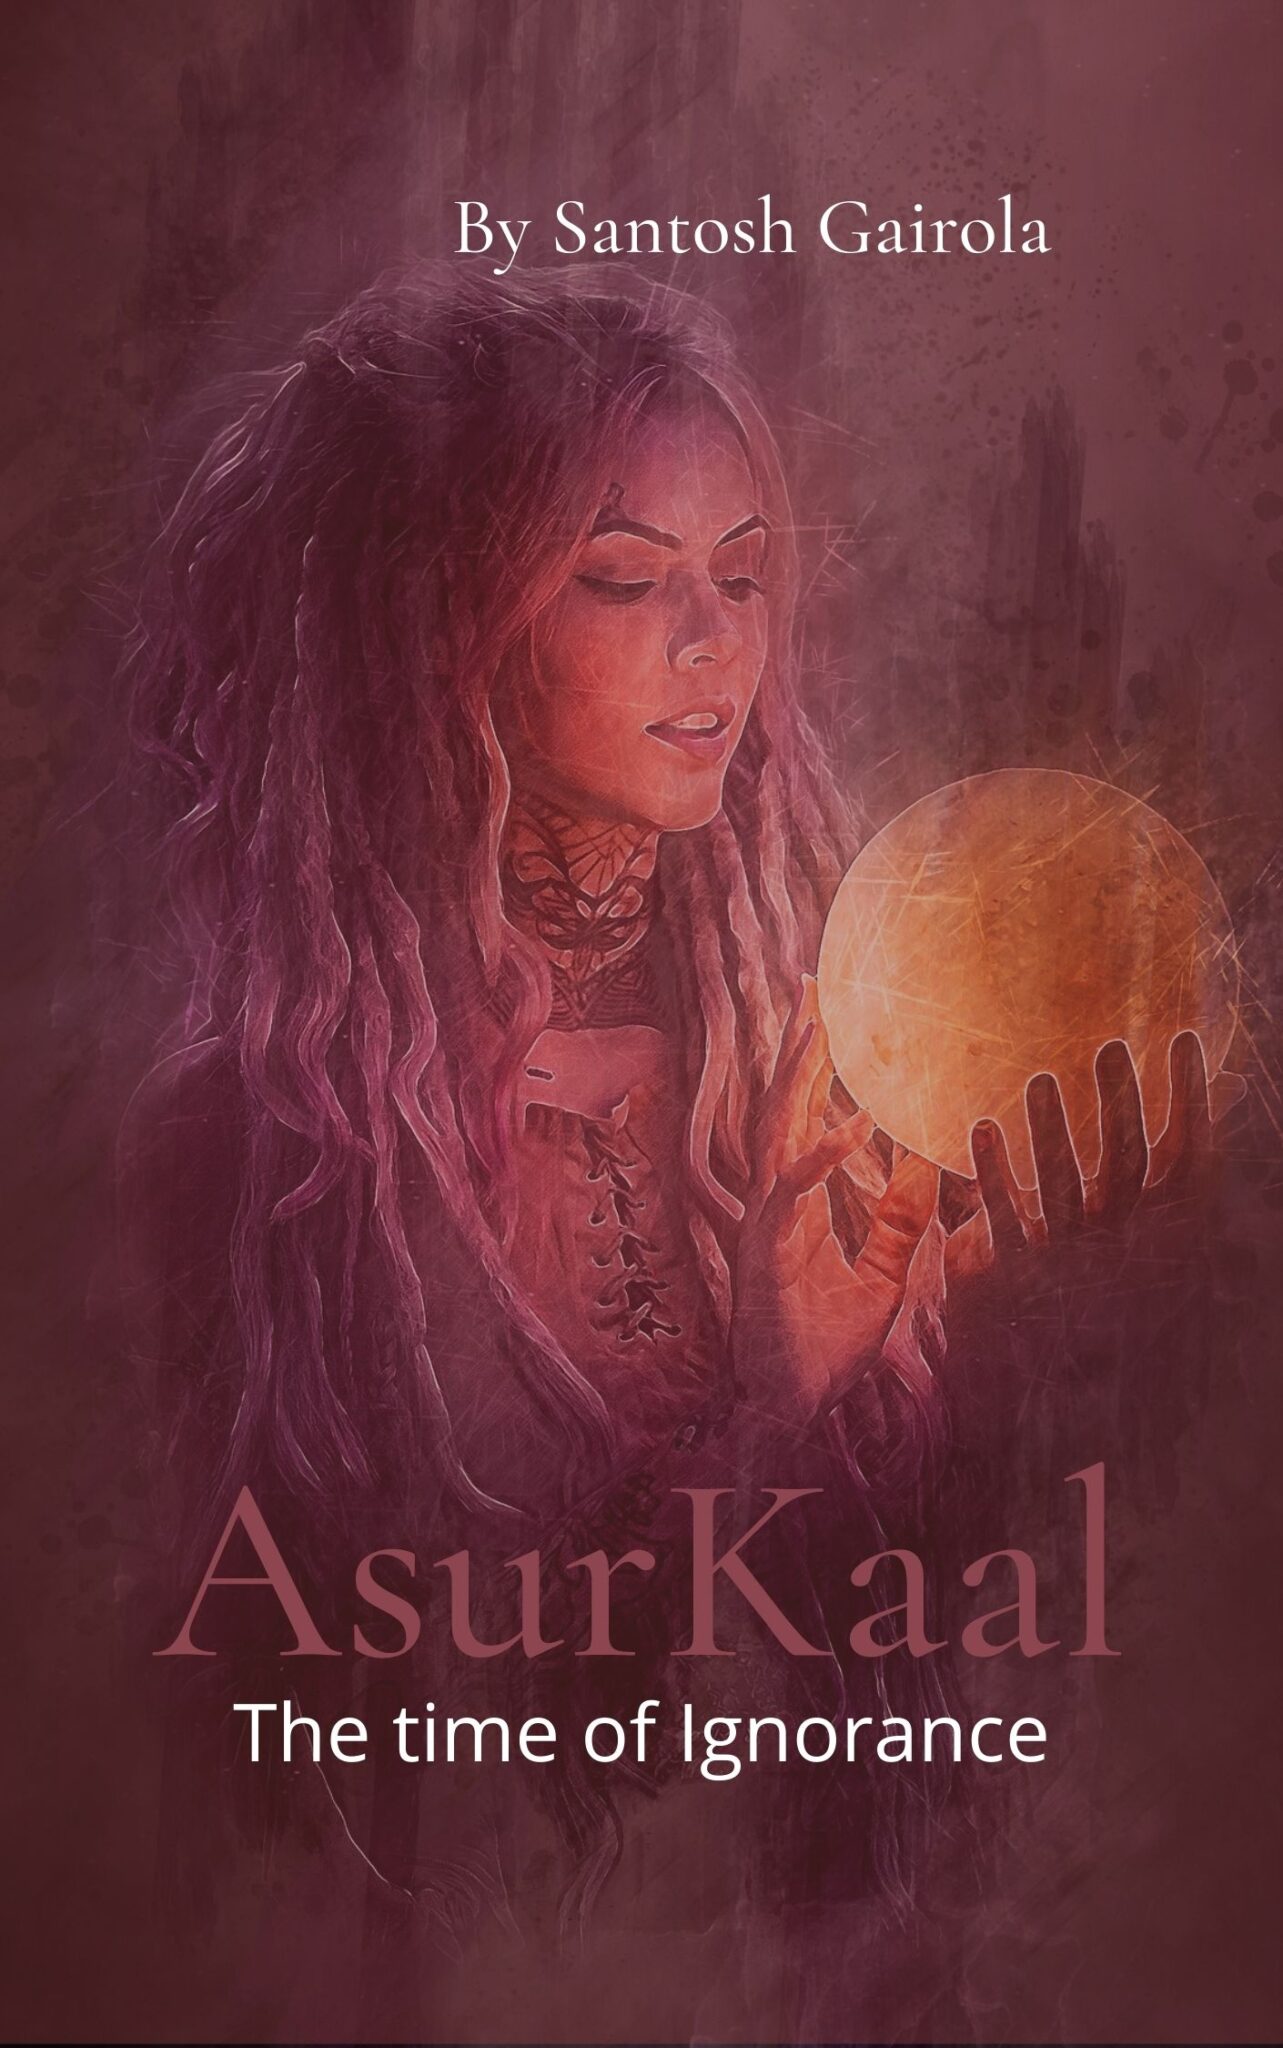 Asurkaal: The time of ignorance